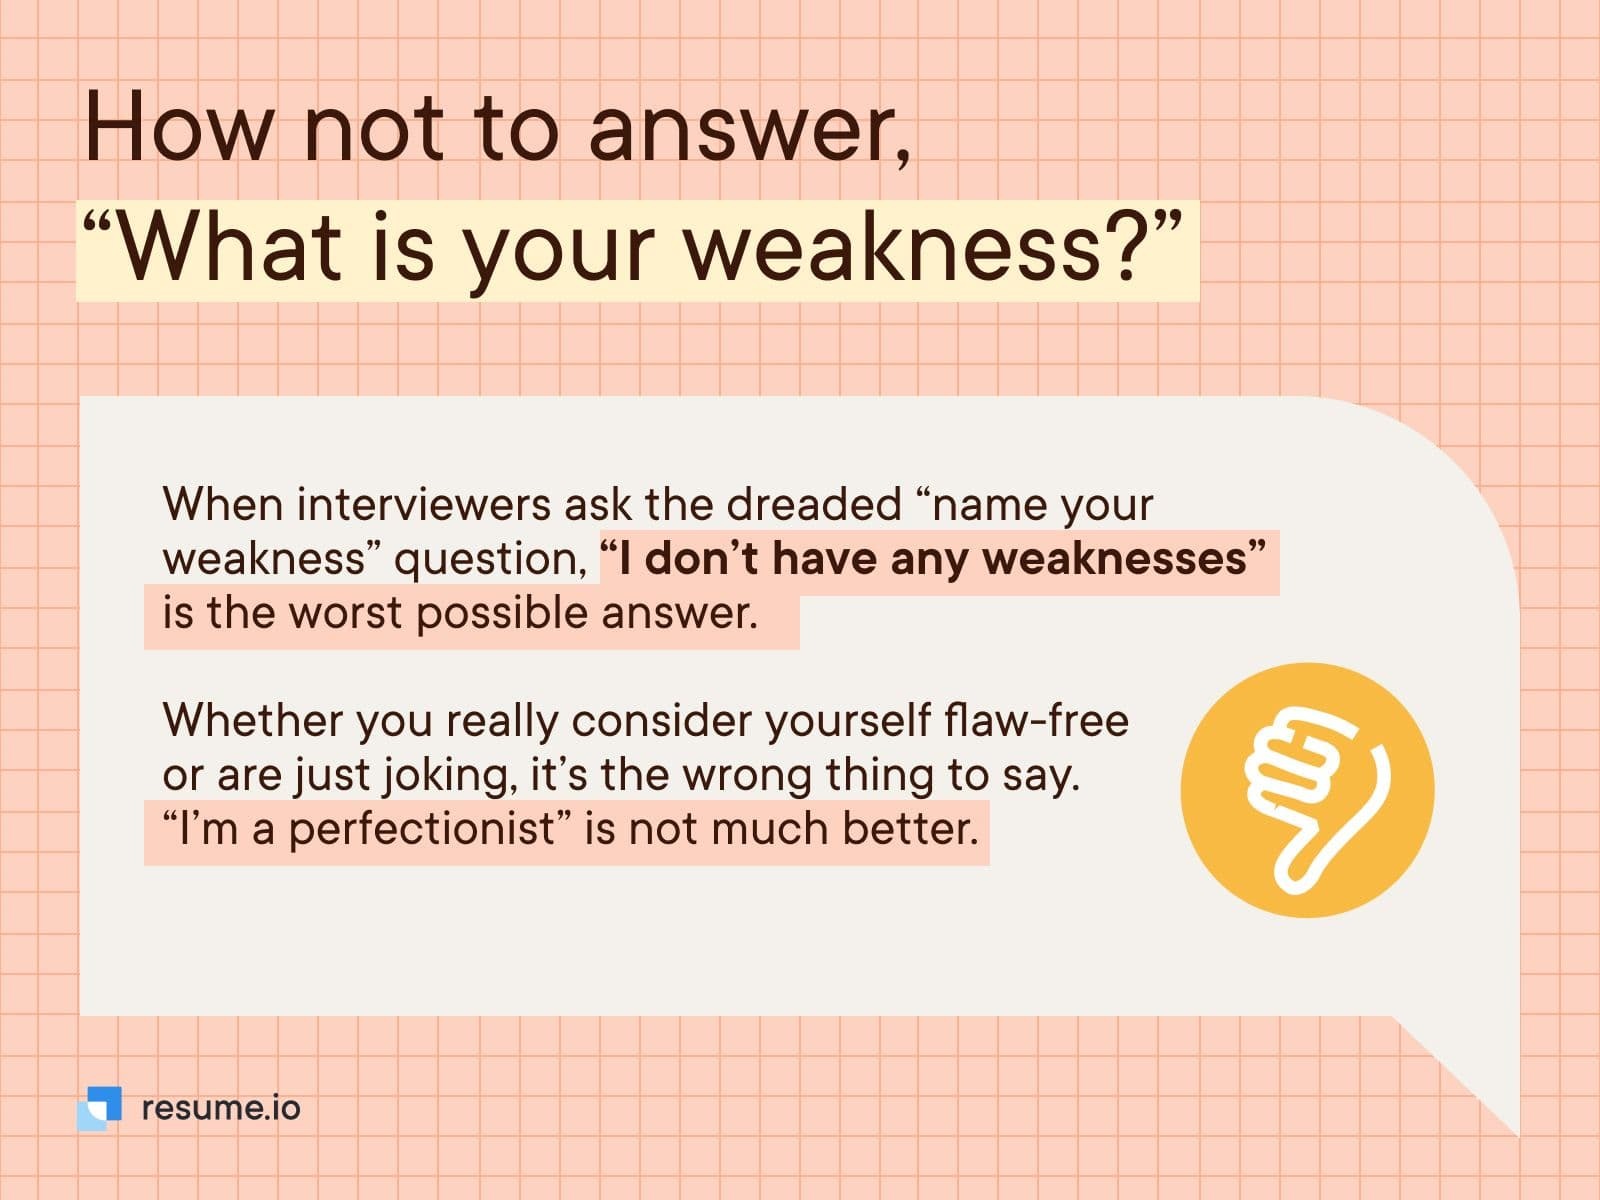 How not to answer, 'What is your weakness?'